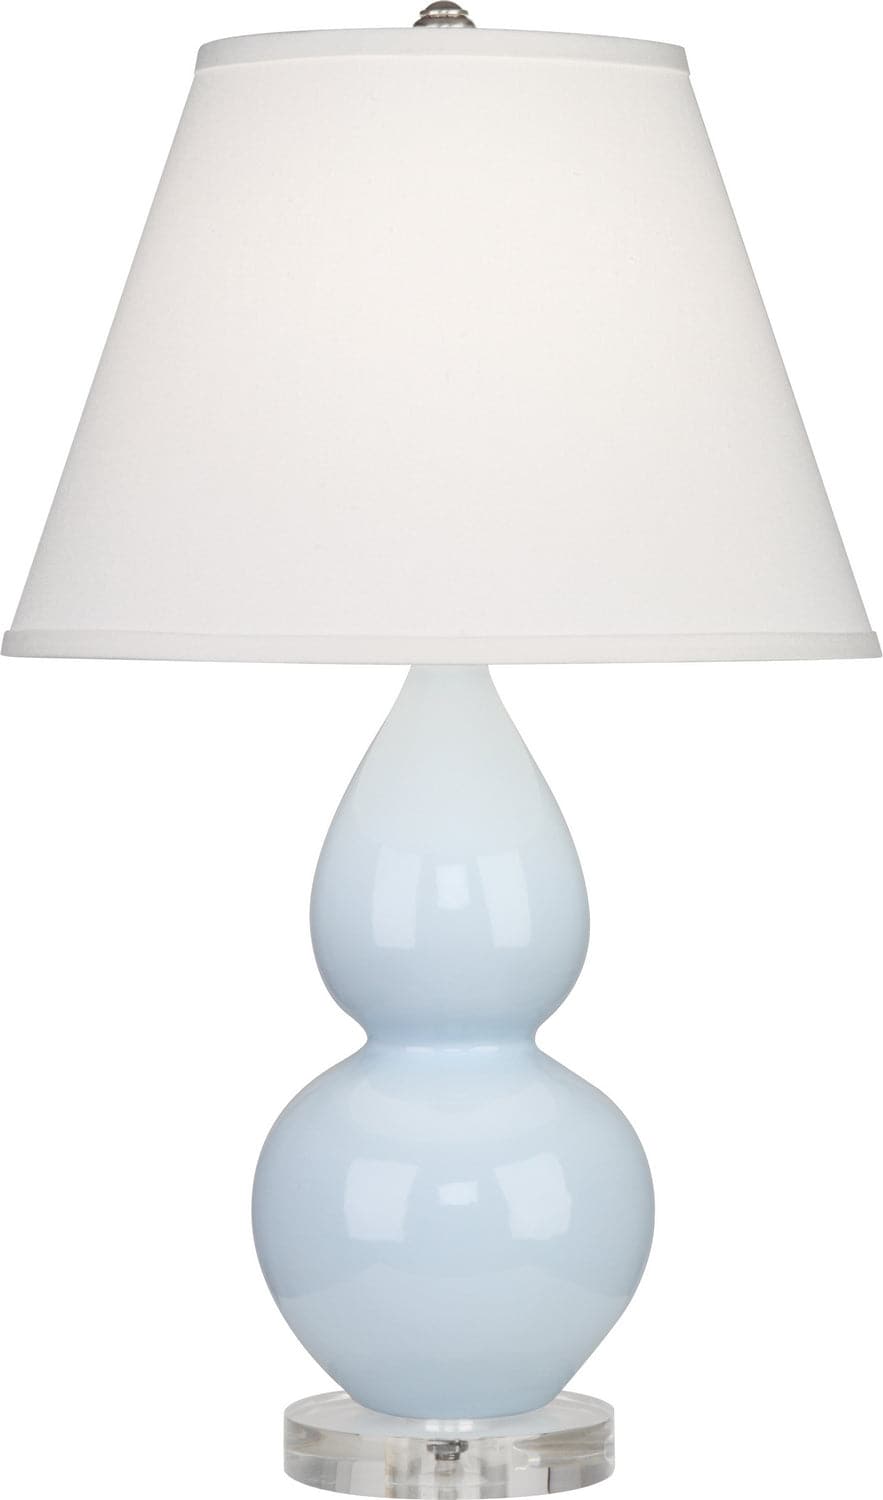 Robert Abbey - A696X - One Light Accent Lamp - Small Double Gourd - Baby Blue Glazed w/Lucite Base